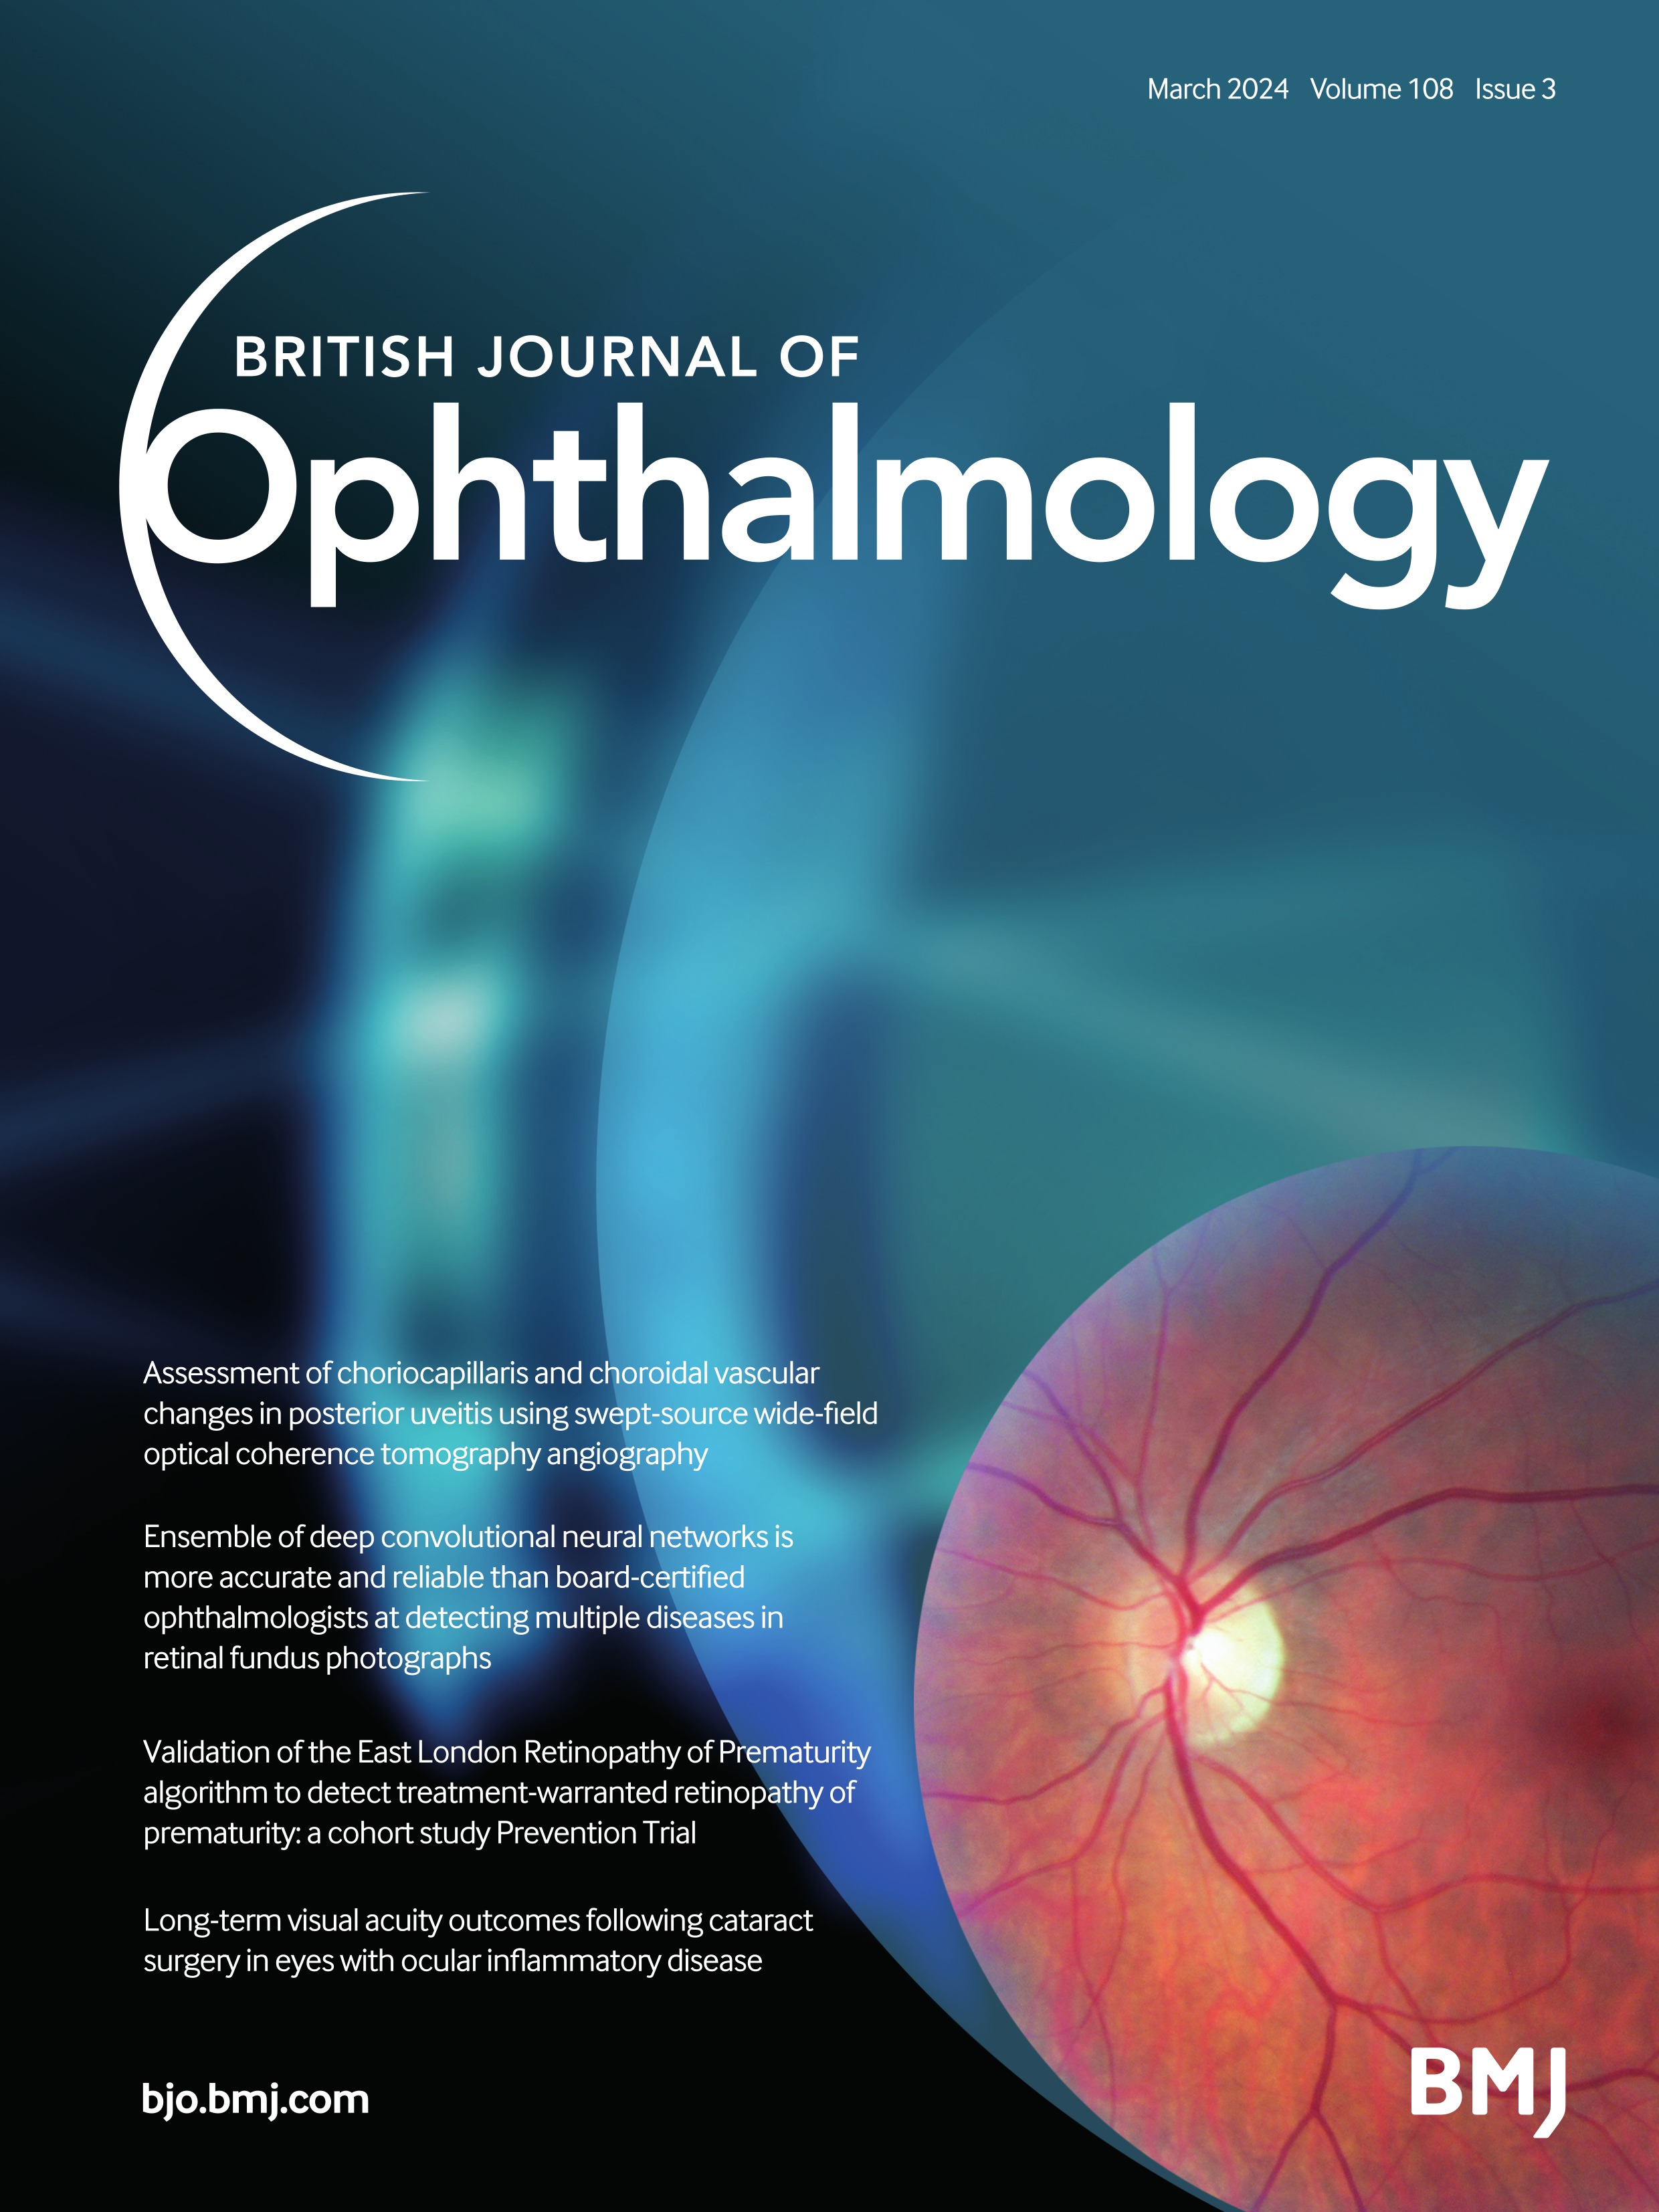 Accurate detection and grading of pterygium through smartphone by a fusion training model